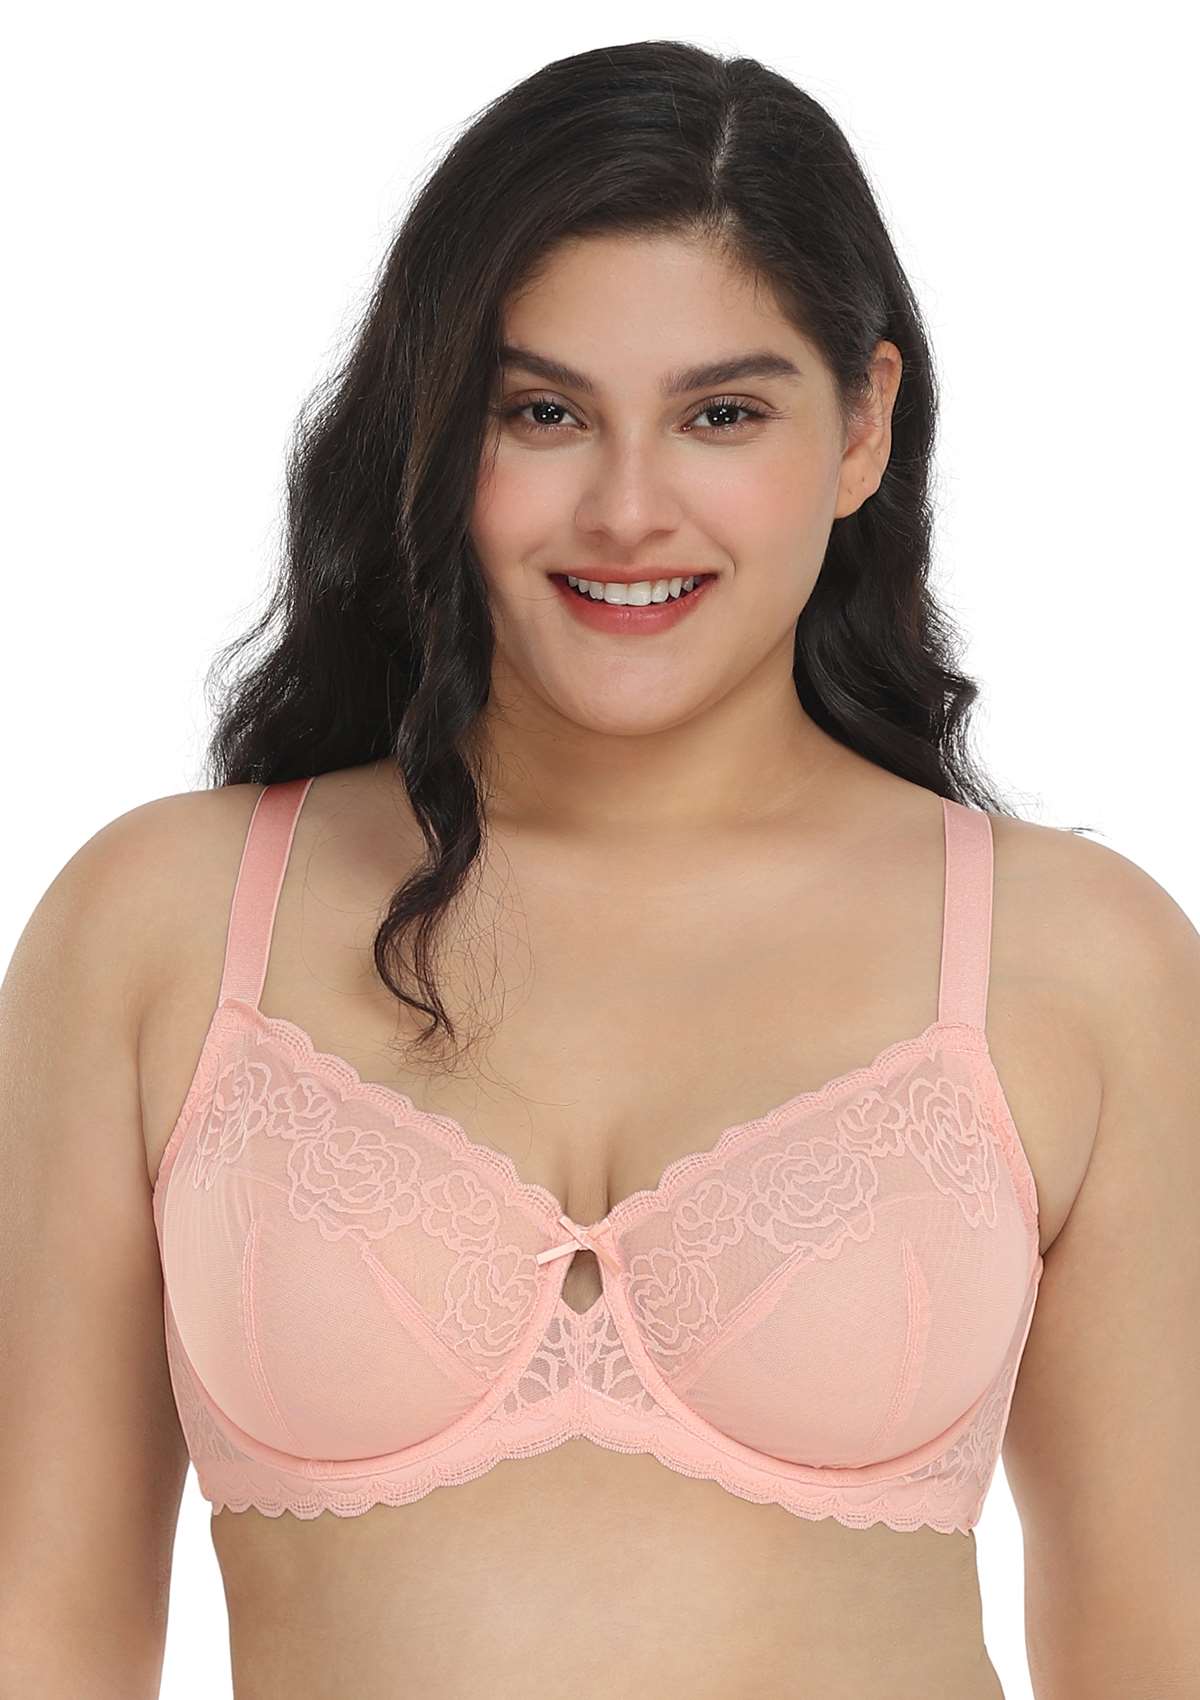 HSIA Rosa Bonica Sheer Lace Mesh Unlined Thin Comfy Woman Bra - Pink / 34 / C